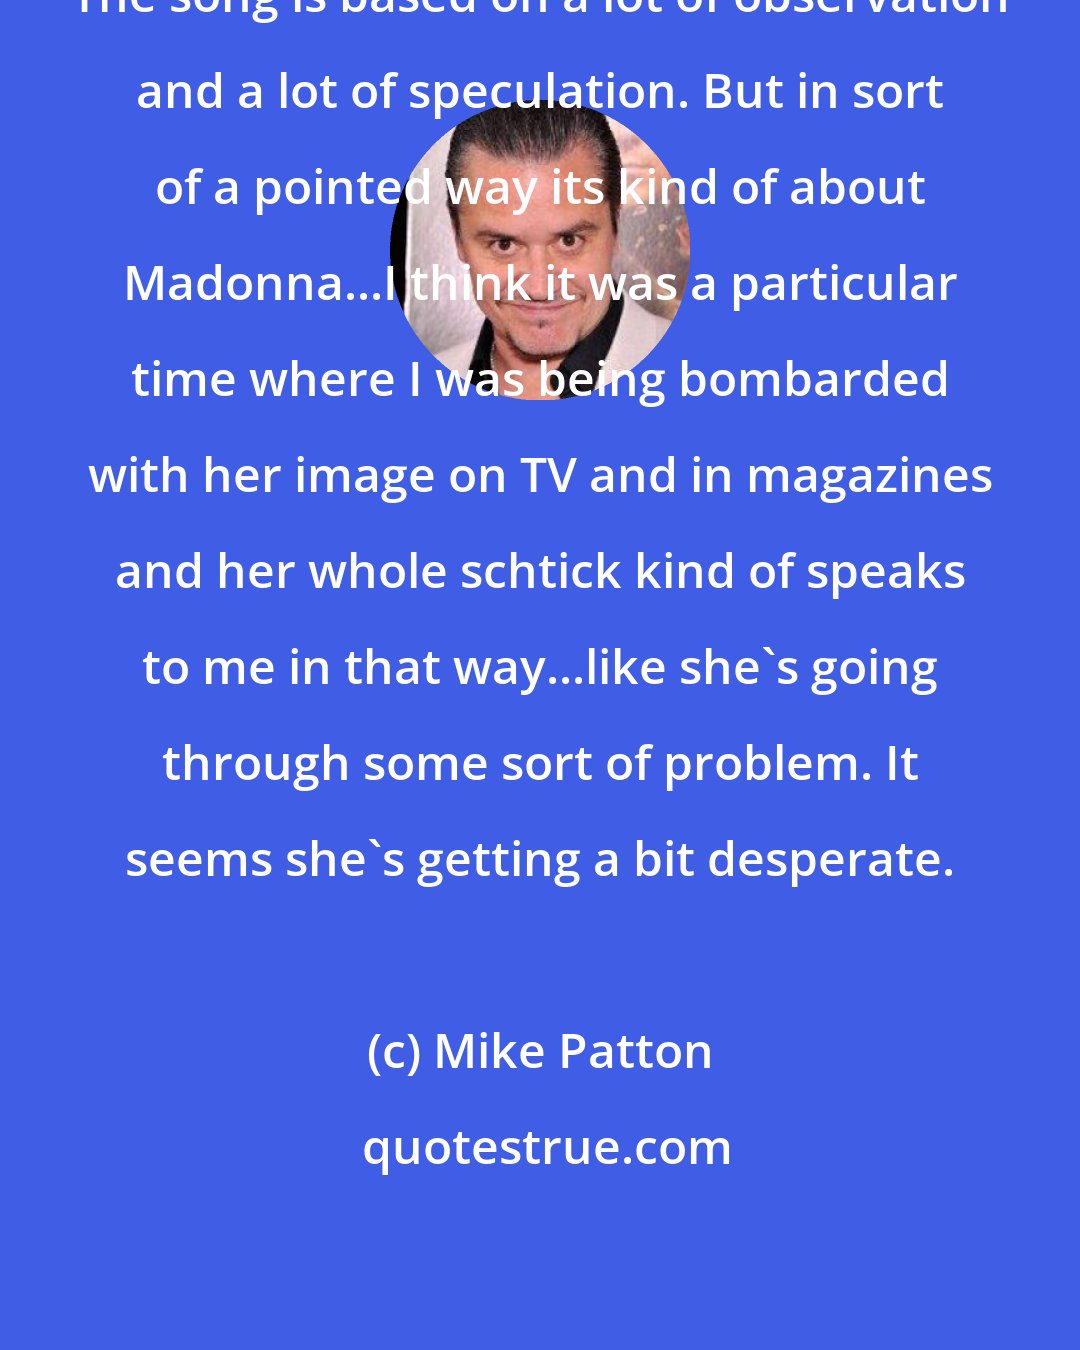 Mike Patton: The song is based on a lot of observation and a lot of speculation. But in sort of a pointed way its kind of about Madonna...I think it was a particular time where I was being bombarded with her image on TV and in magazines and her whole schtick kind of speaks to me in that way...like she's going through some sort of problem. It seems she's getting a bit desperate.